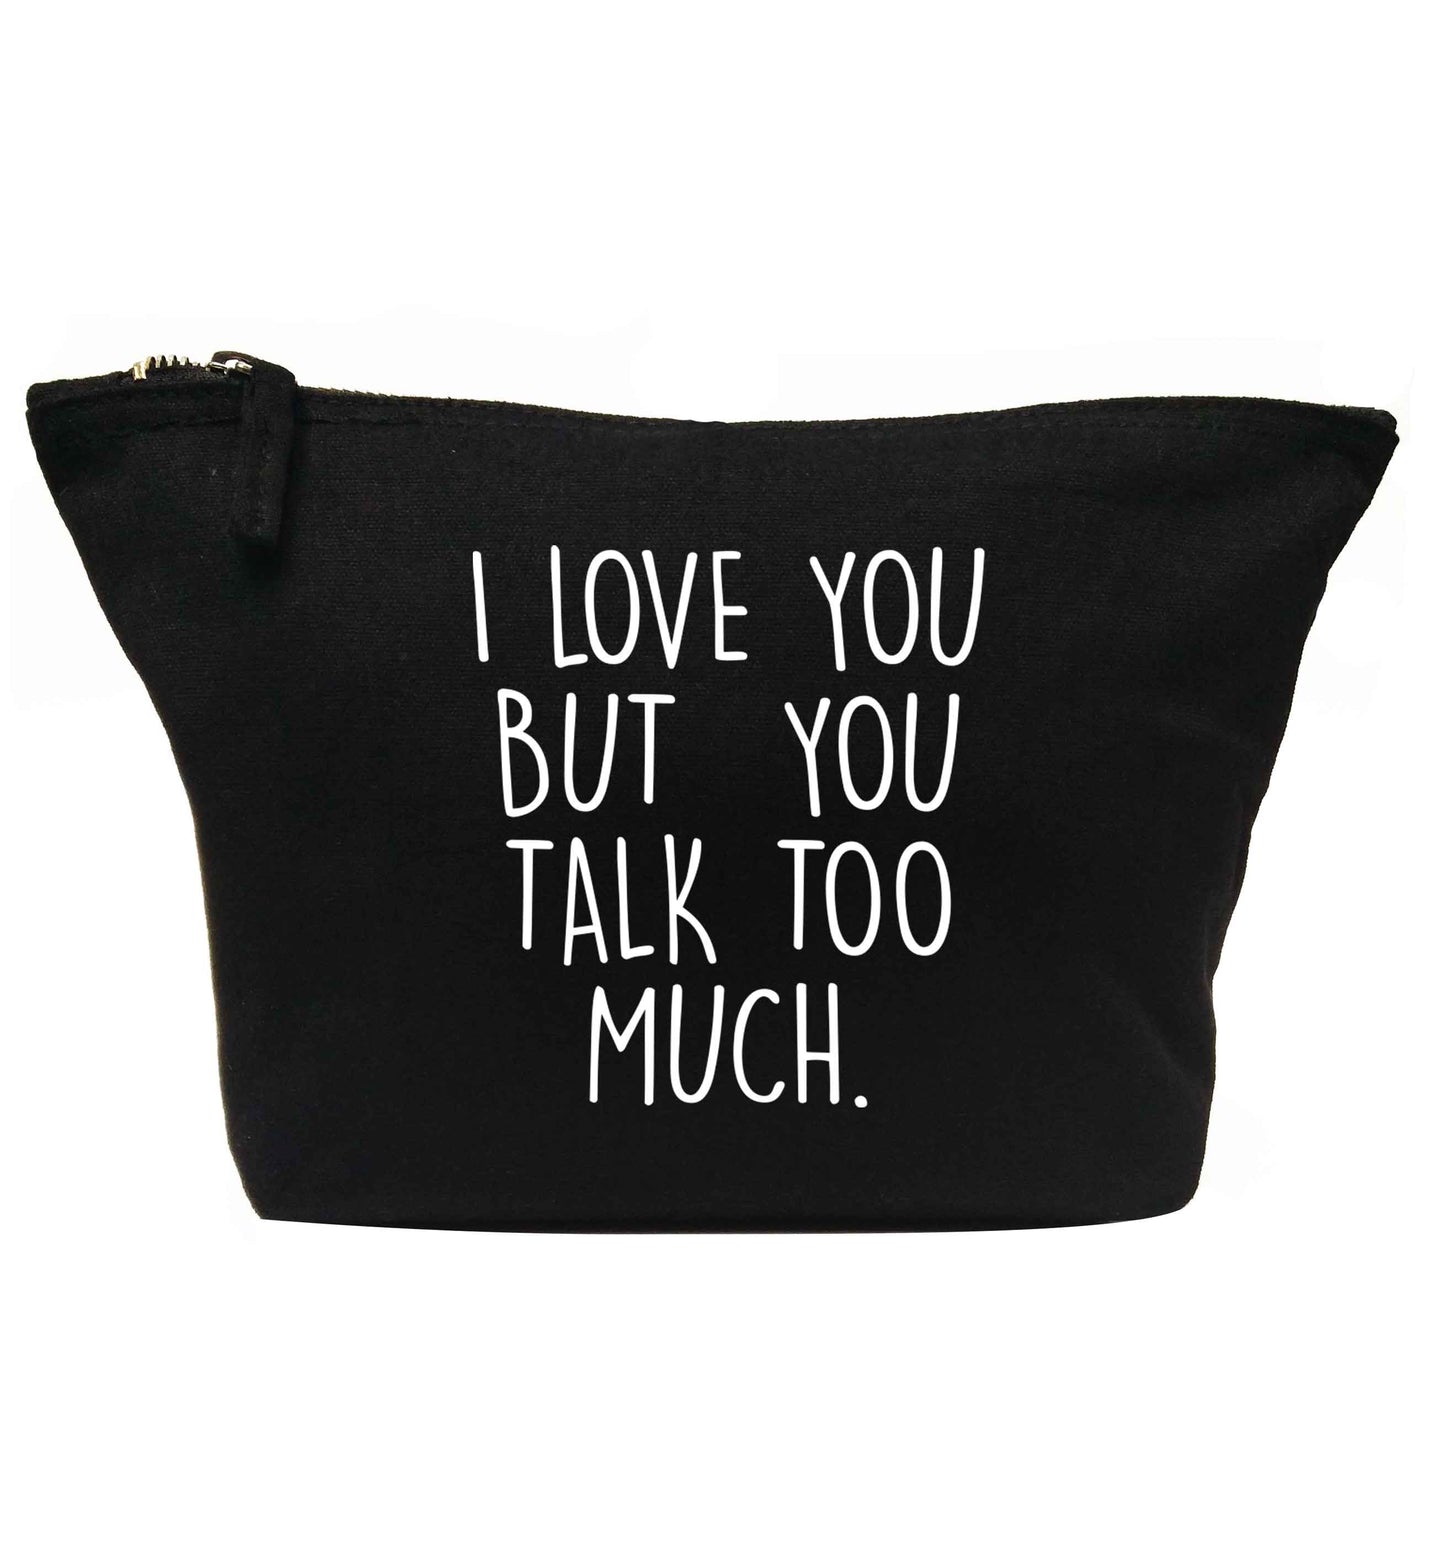 I love you but you talk too much | Makeup / wash bag